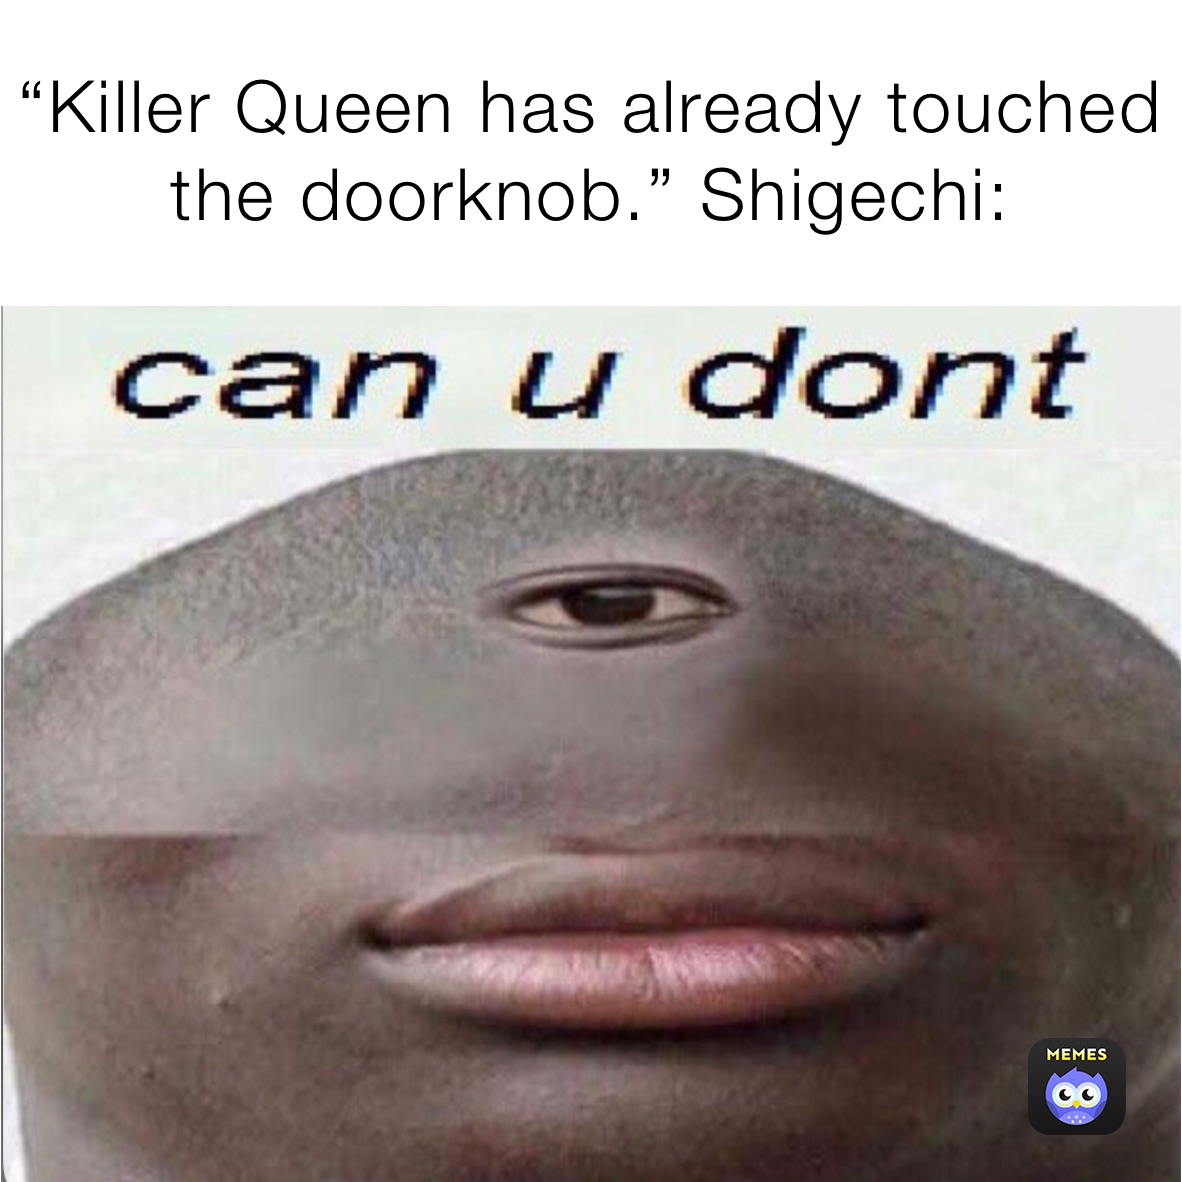 “Killer Queen has already touched the doorknob.” Shigechi: